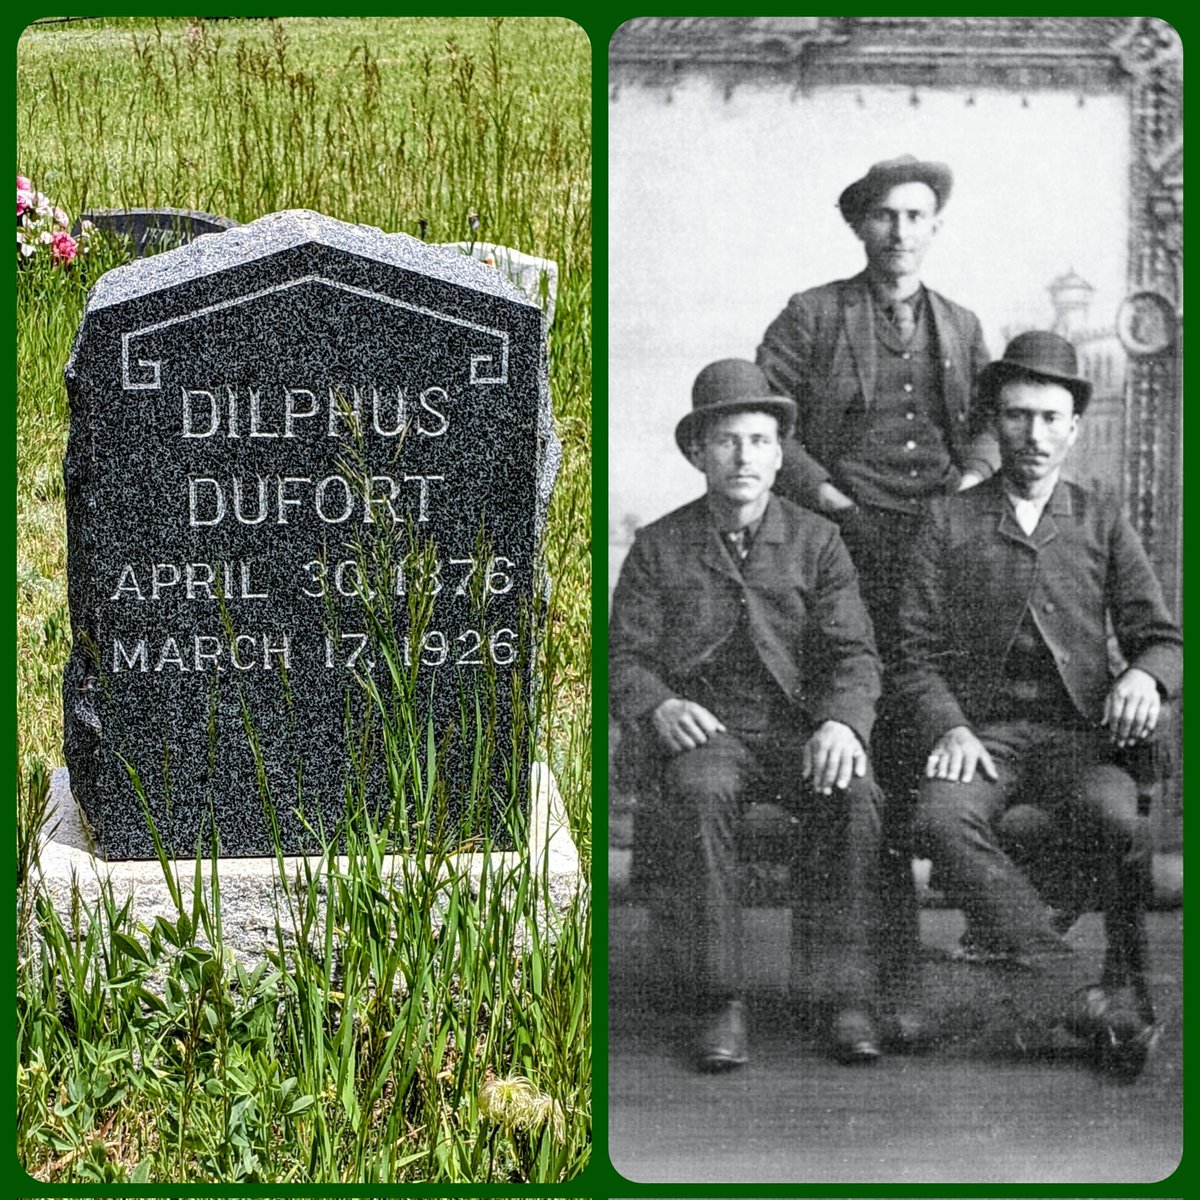 New Blog Post! What's in a Name? The Short Story of Dilphus Dufort
Click here: theordinaryextraordinarycemetery.com/blog/whats-in-…

#TwinBrothers #WestwardTravel #LoggingIndustry #HornCemetery #ParkCounty #Colorado #IOOFCemetery #Bandon #Oregon #Genealogy  #GraveyardMystery #ForgottenNames #UntoldStories